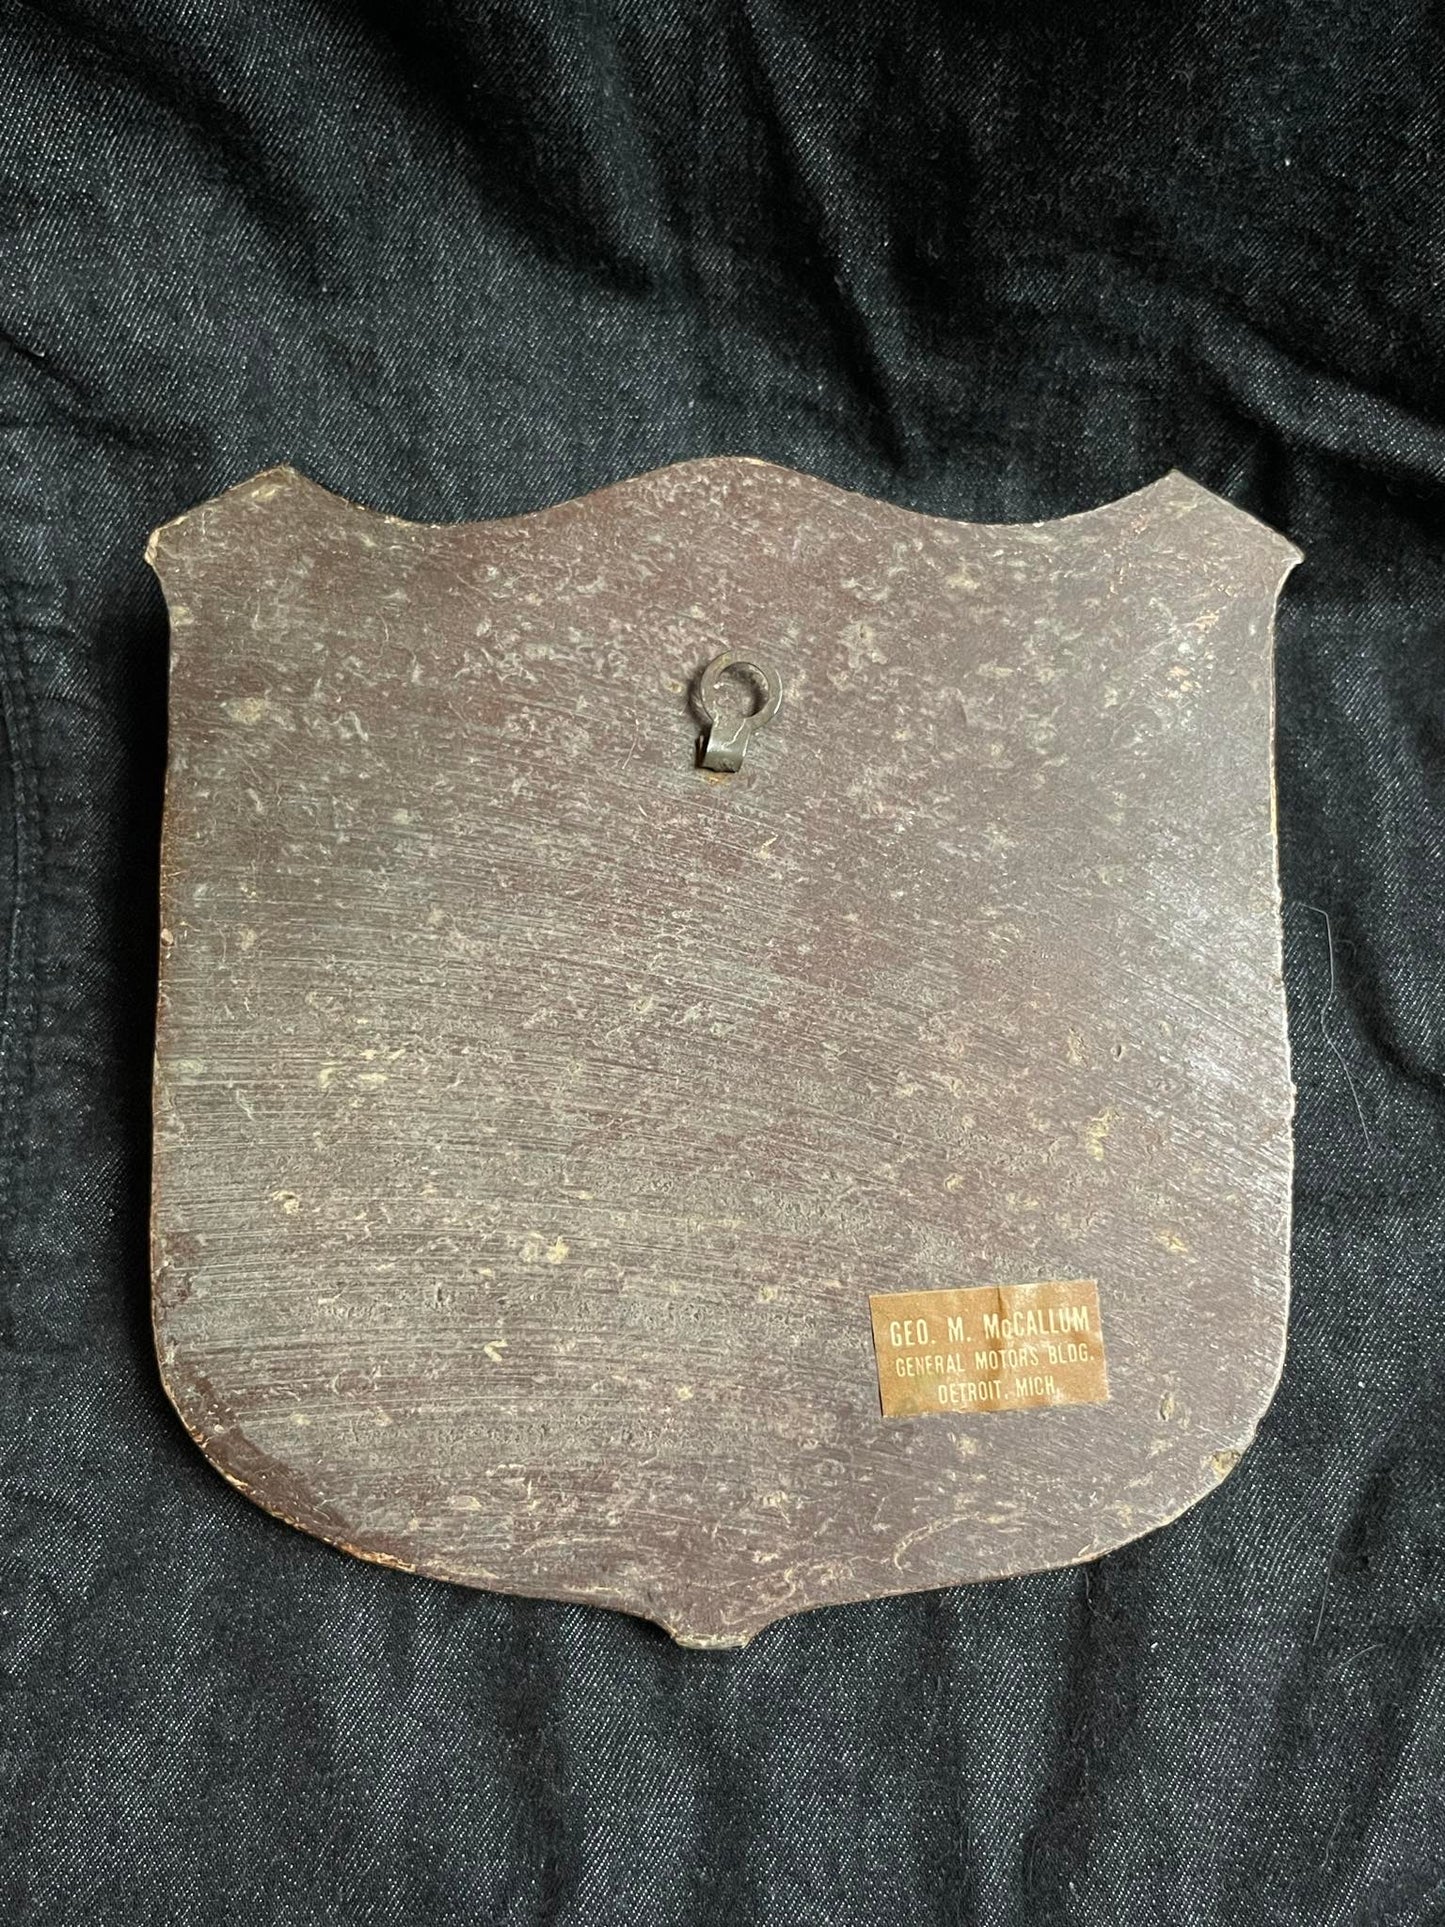 US ARMY "DOING HIS PART" WOODEN SHIELD/PLAQUE